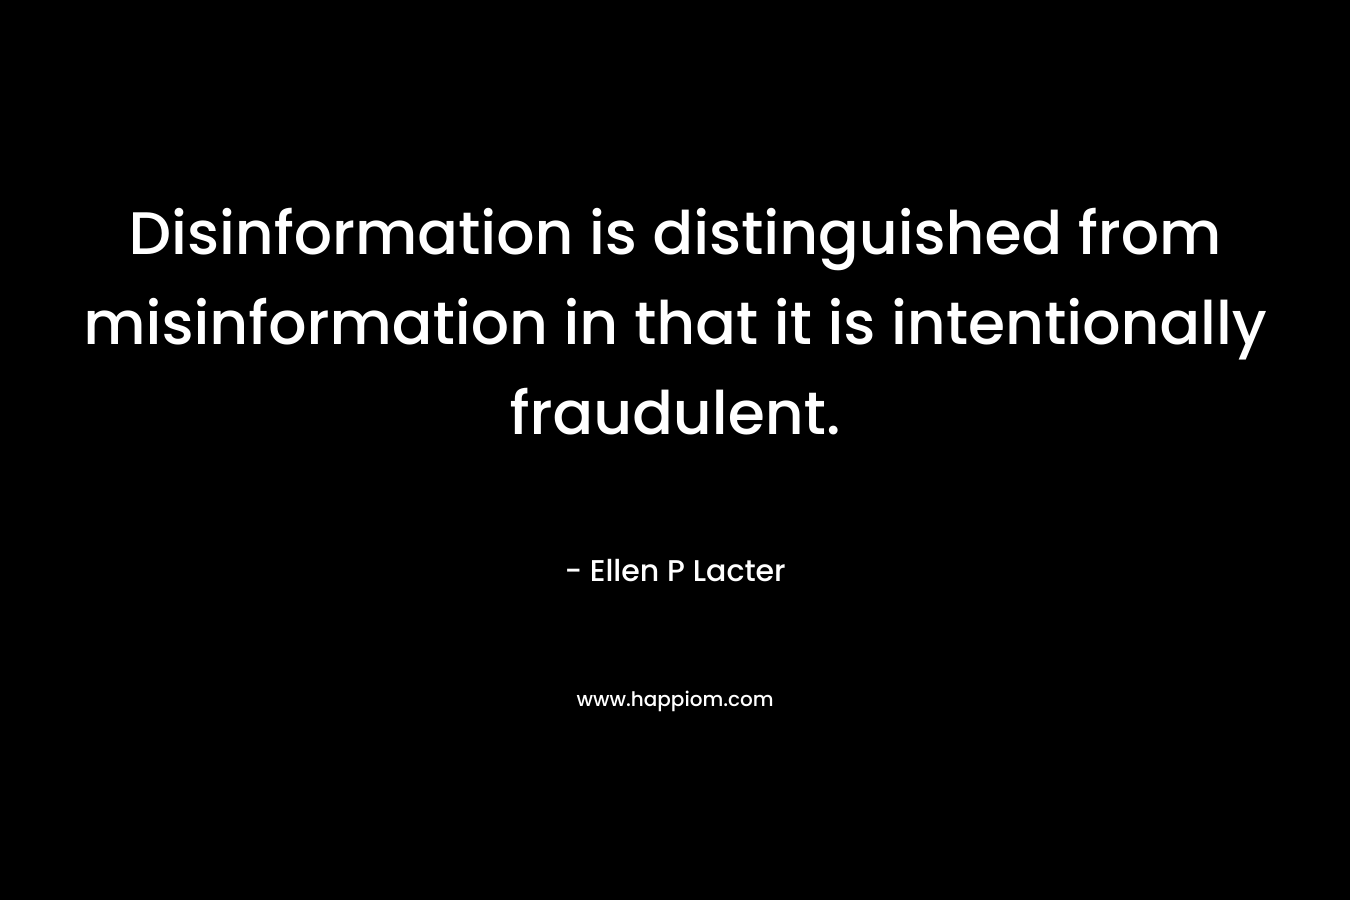 Disinformation is distinguished from misinformation in that it is intentionally fraudulent. – Ellen P Lacter